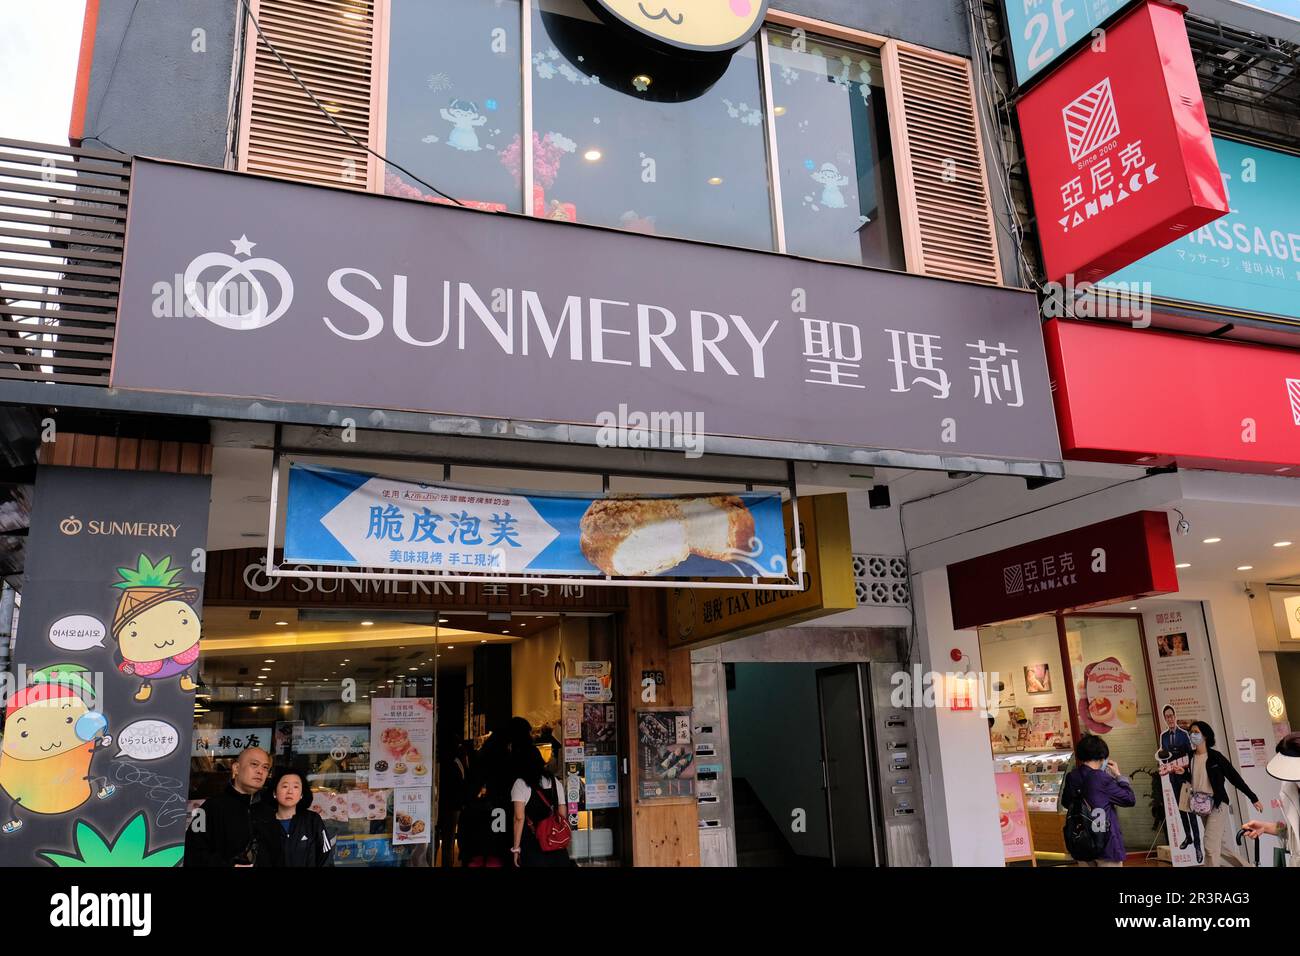 Sunmerry bakery store in the Daan District, Taipei, Taiwan; local pastry shop specializing in Taiwanese bread, pineapple cake, and pastries. Stock Photo